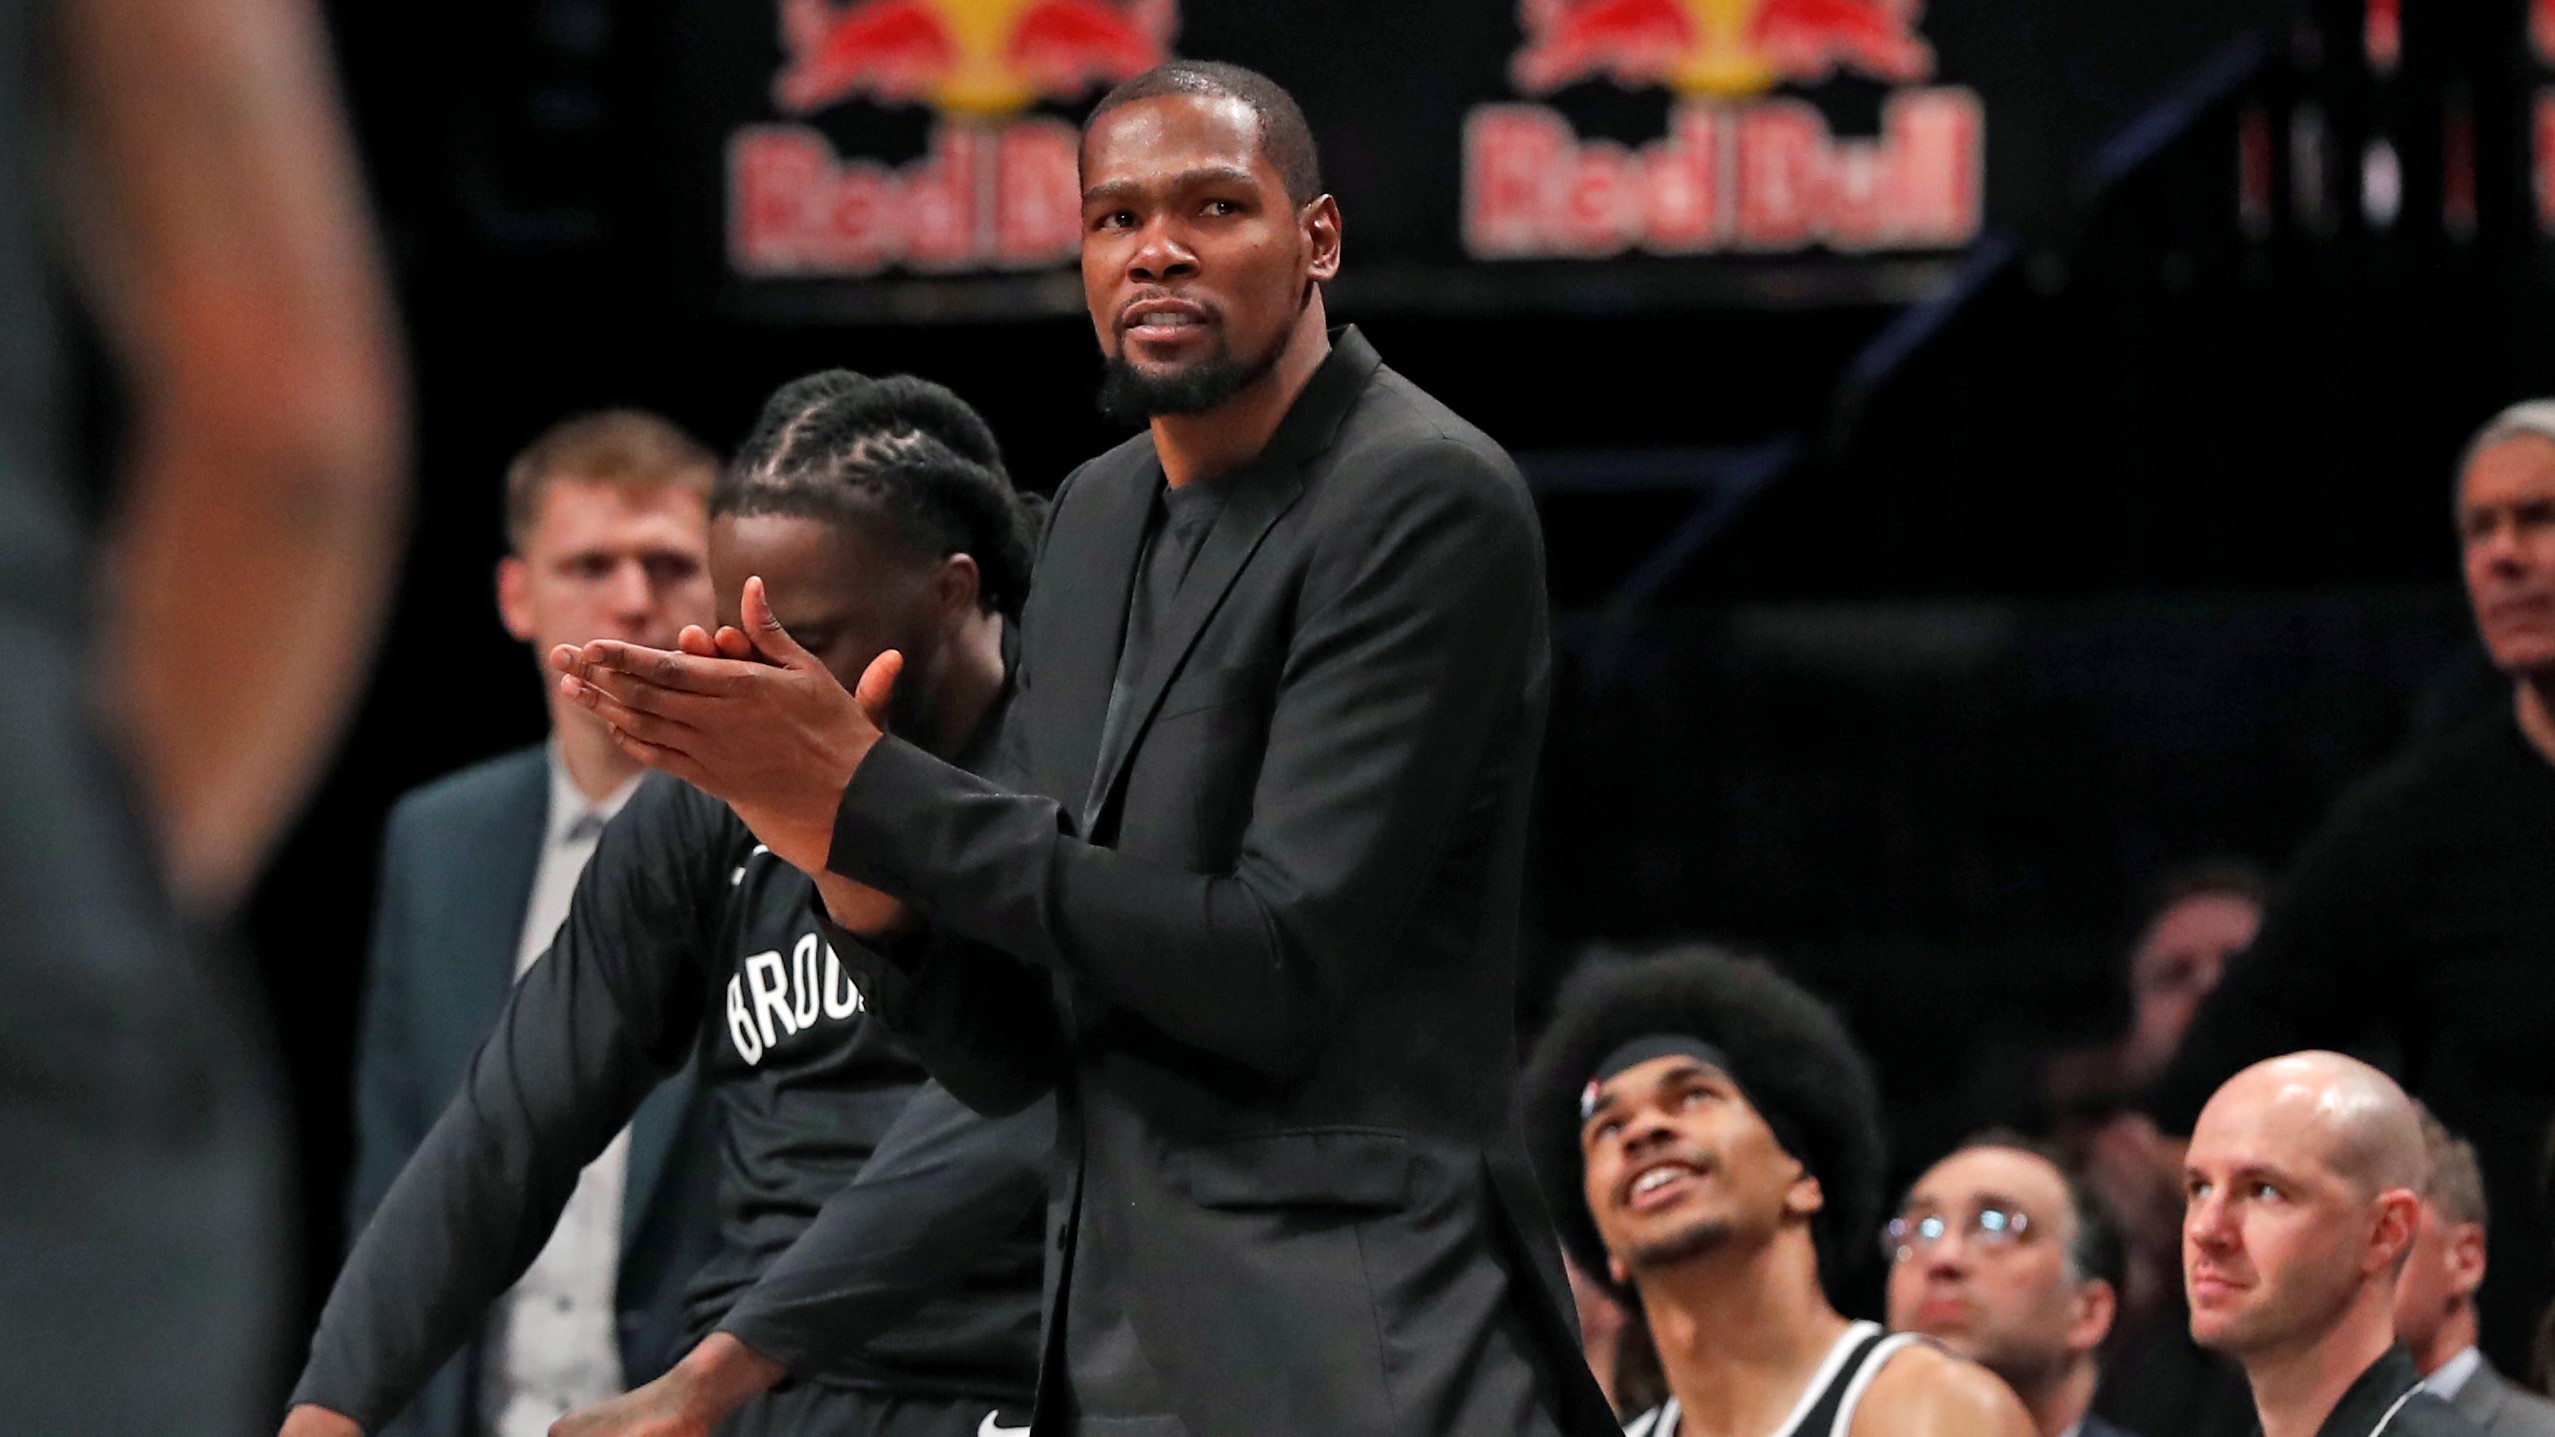 Basketball star Kevin Durant buys stake in MLS team